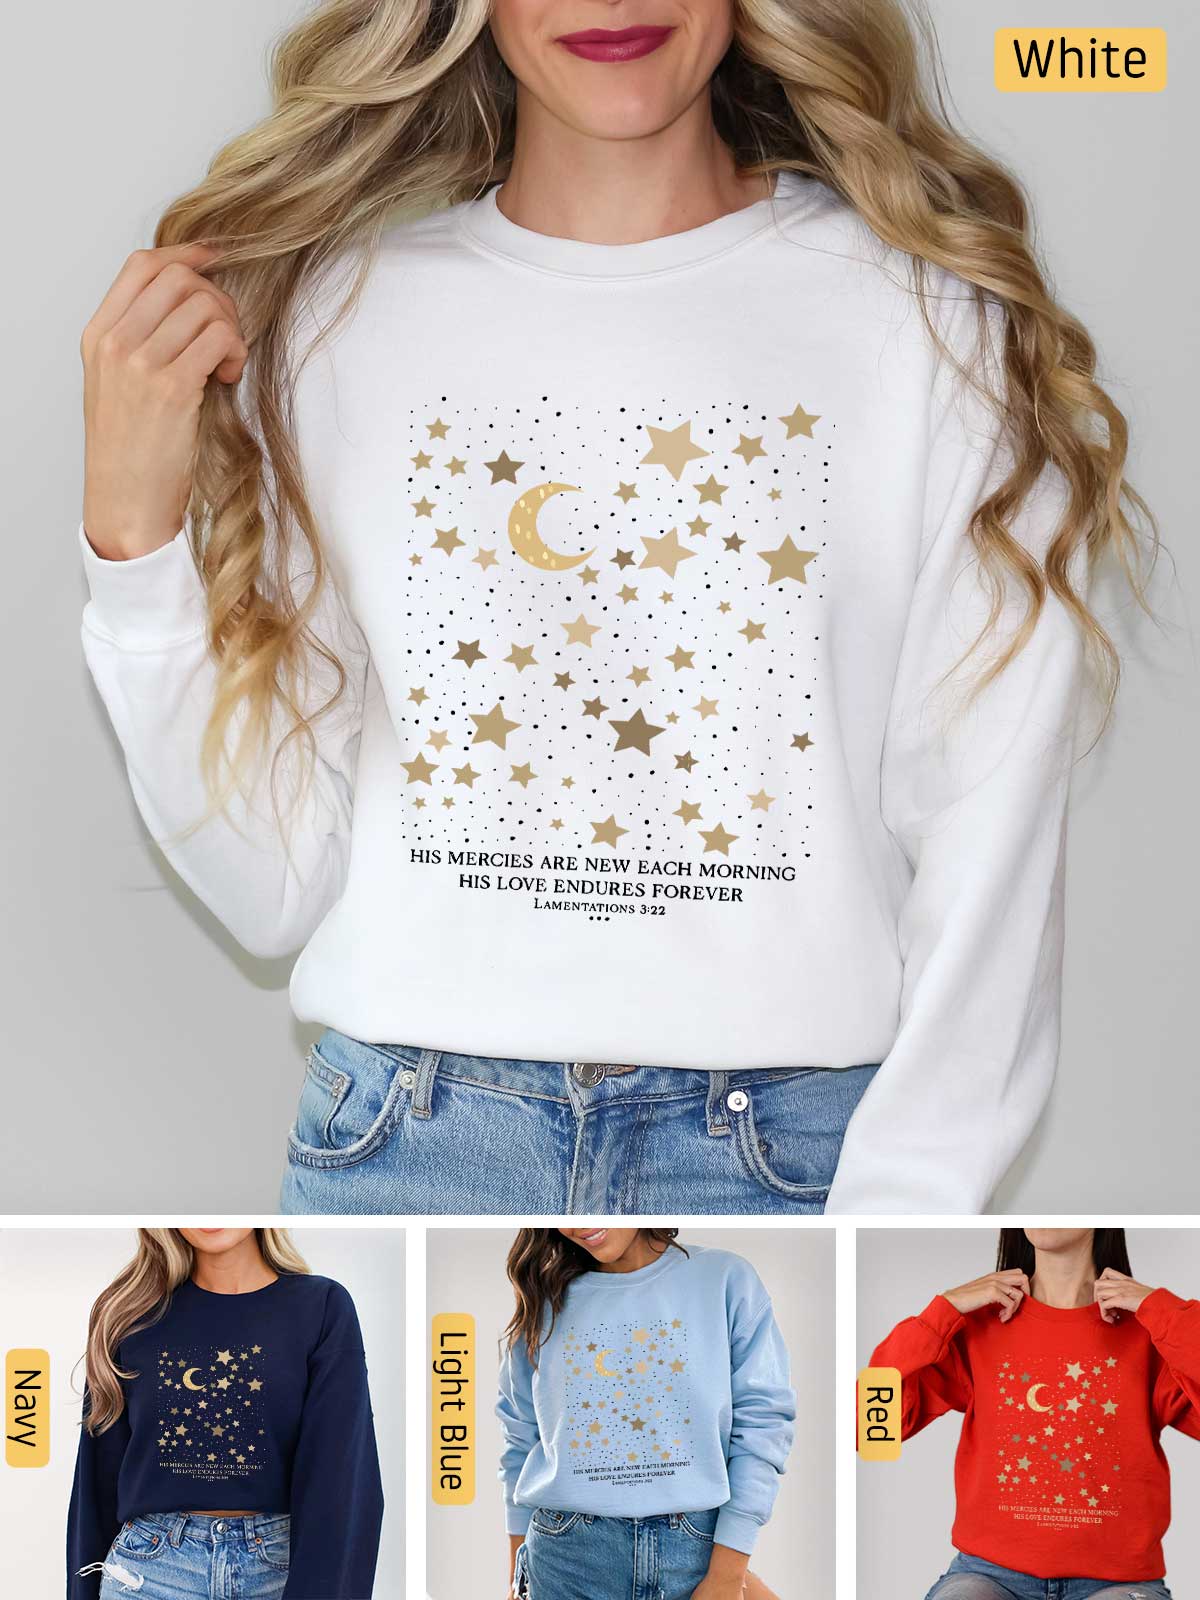 a woman wearing a white sweatshirt with gold stars on it